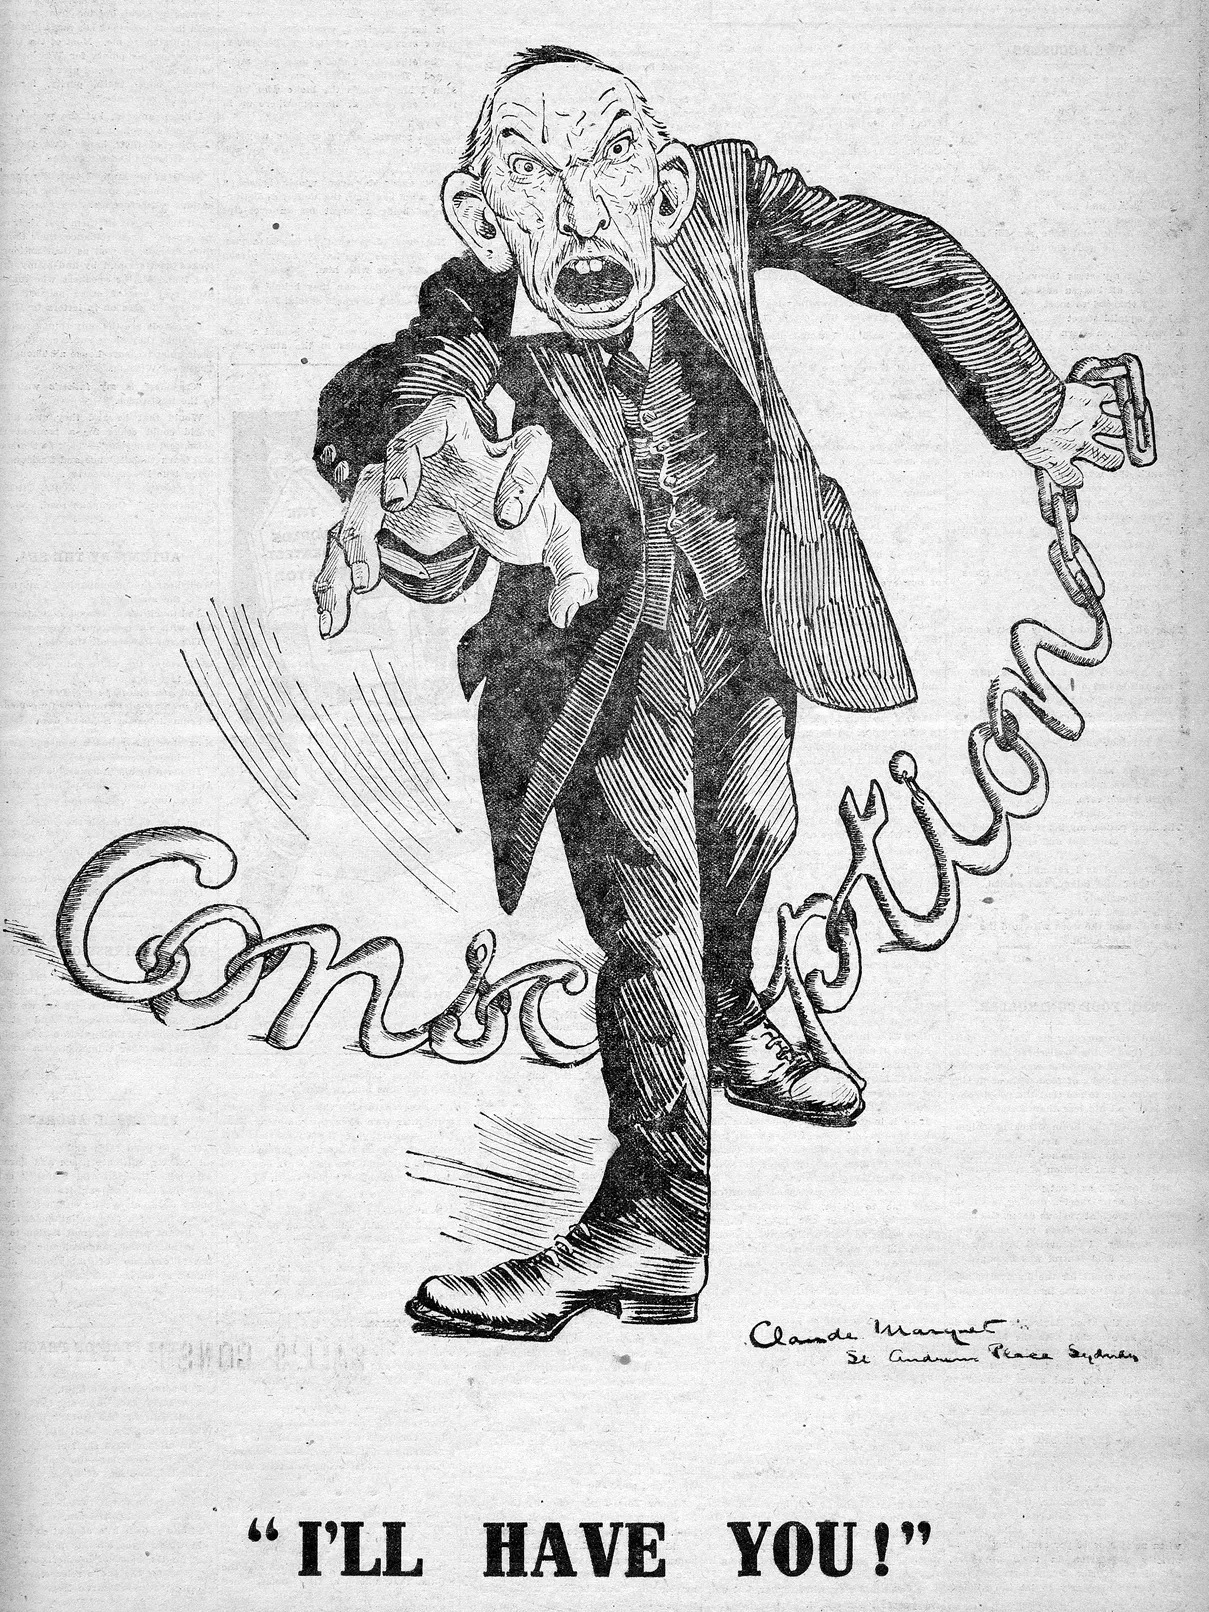 Caricature of Billy Hughes pulling a chain behind him that spells the word 'conscription', and a caption: "I'LL HAVE YOU!"